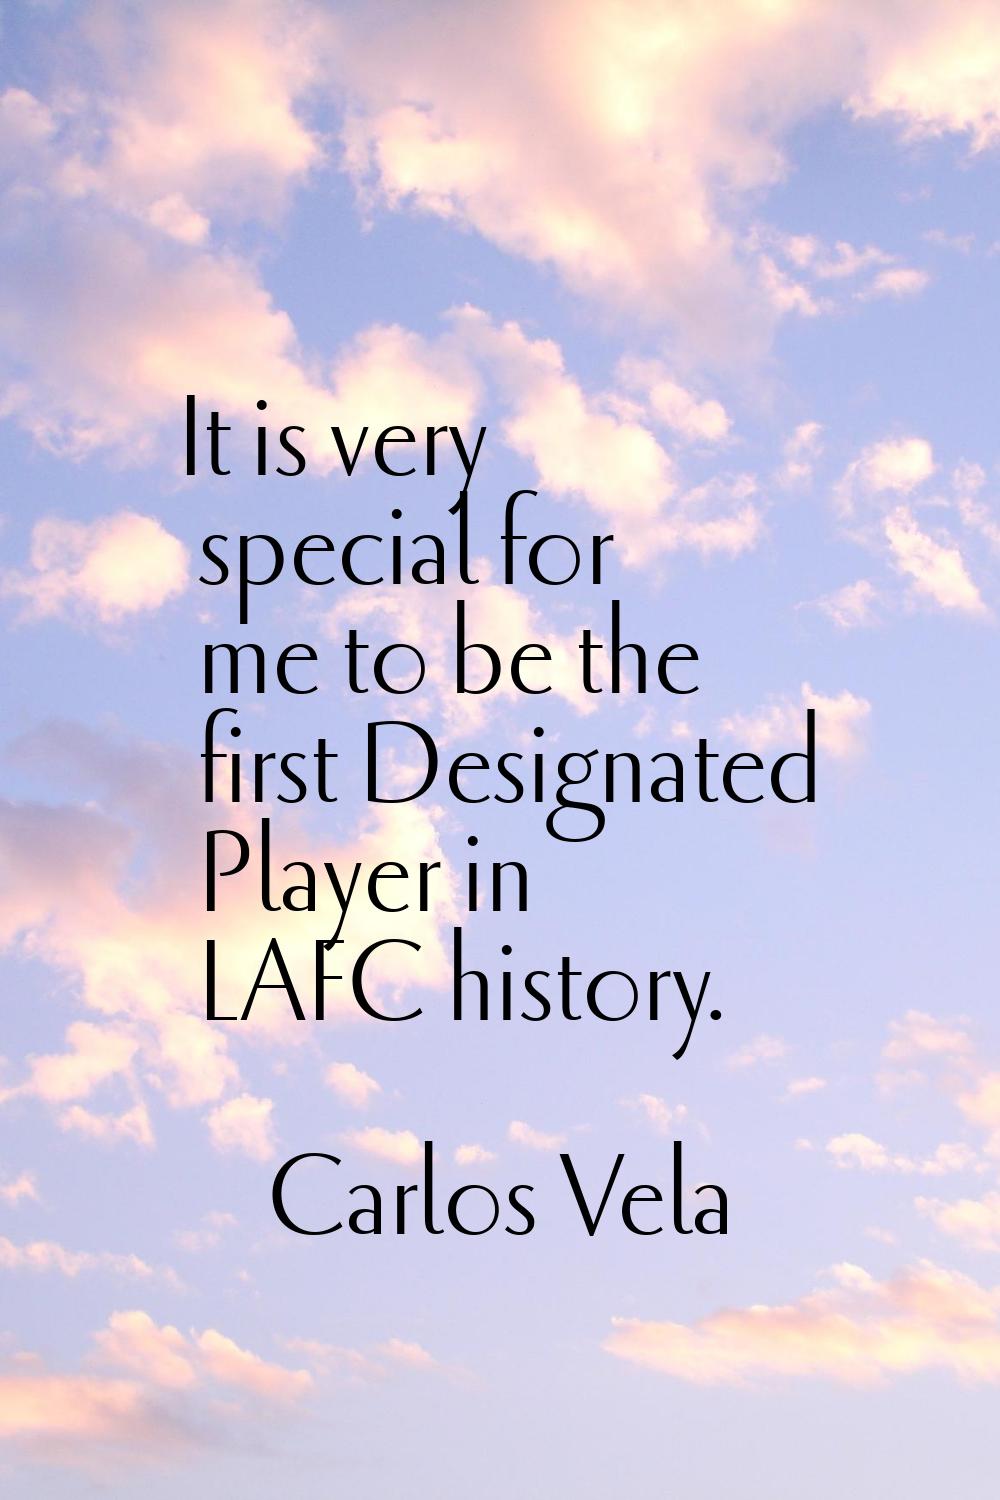 It is very special for me to be the first Designated Player in LAFC history.